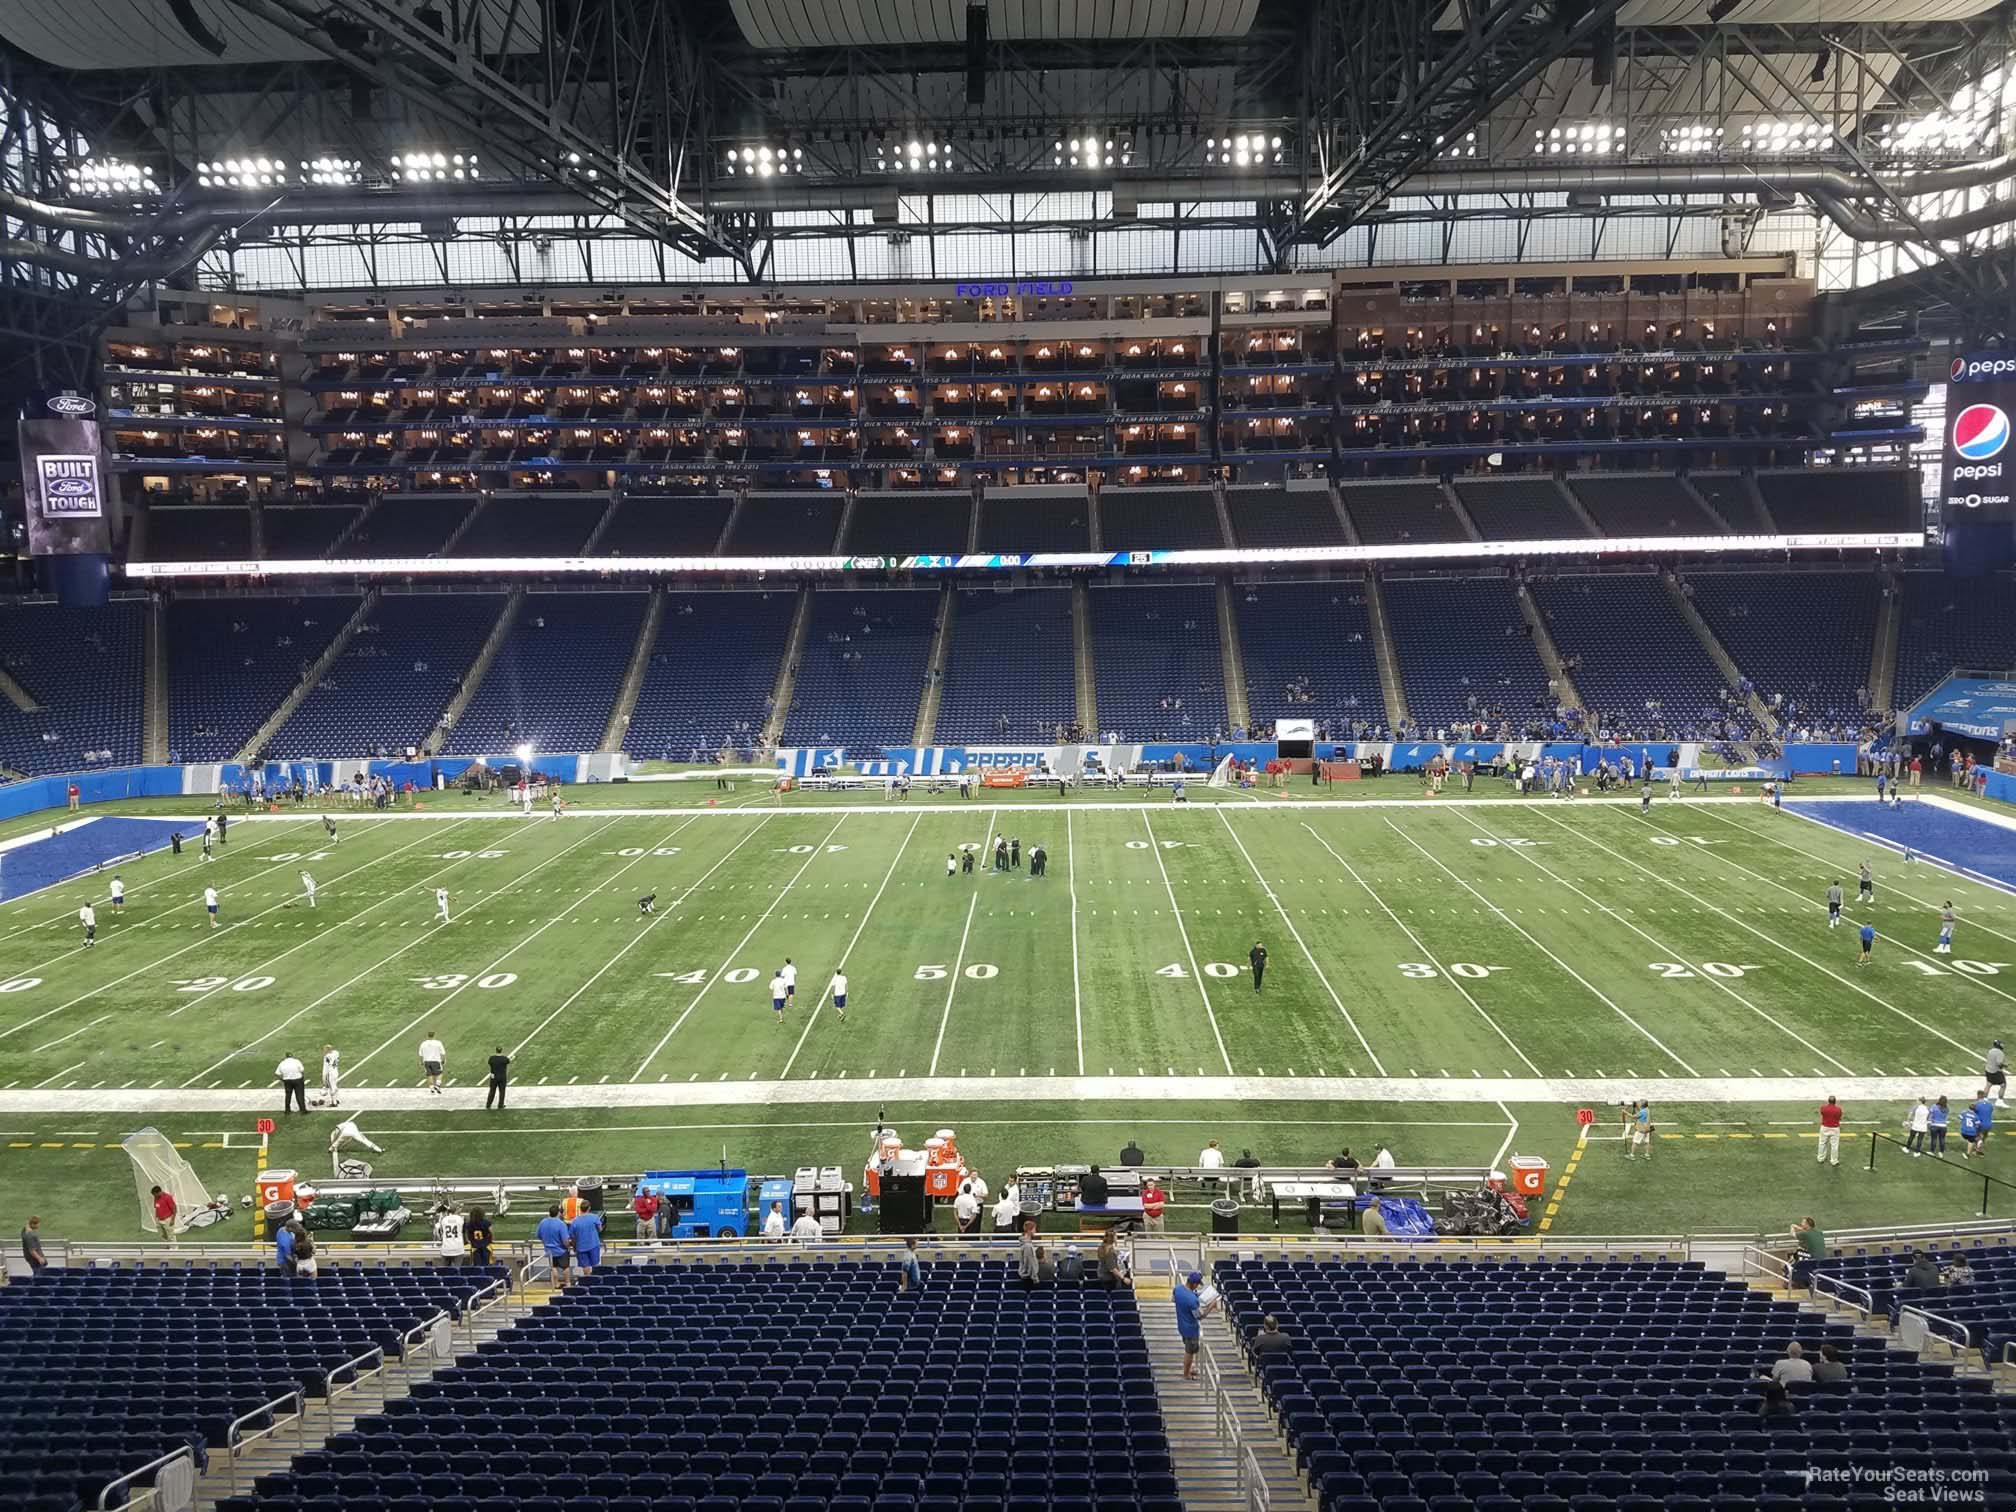 section 231, row 1 seat view  for football - ford field